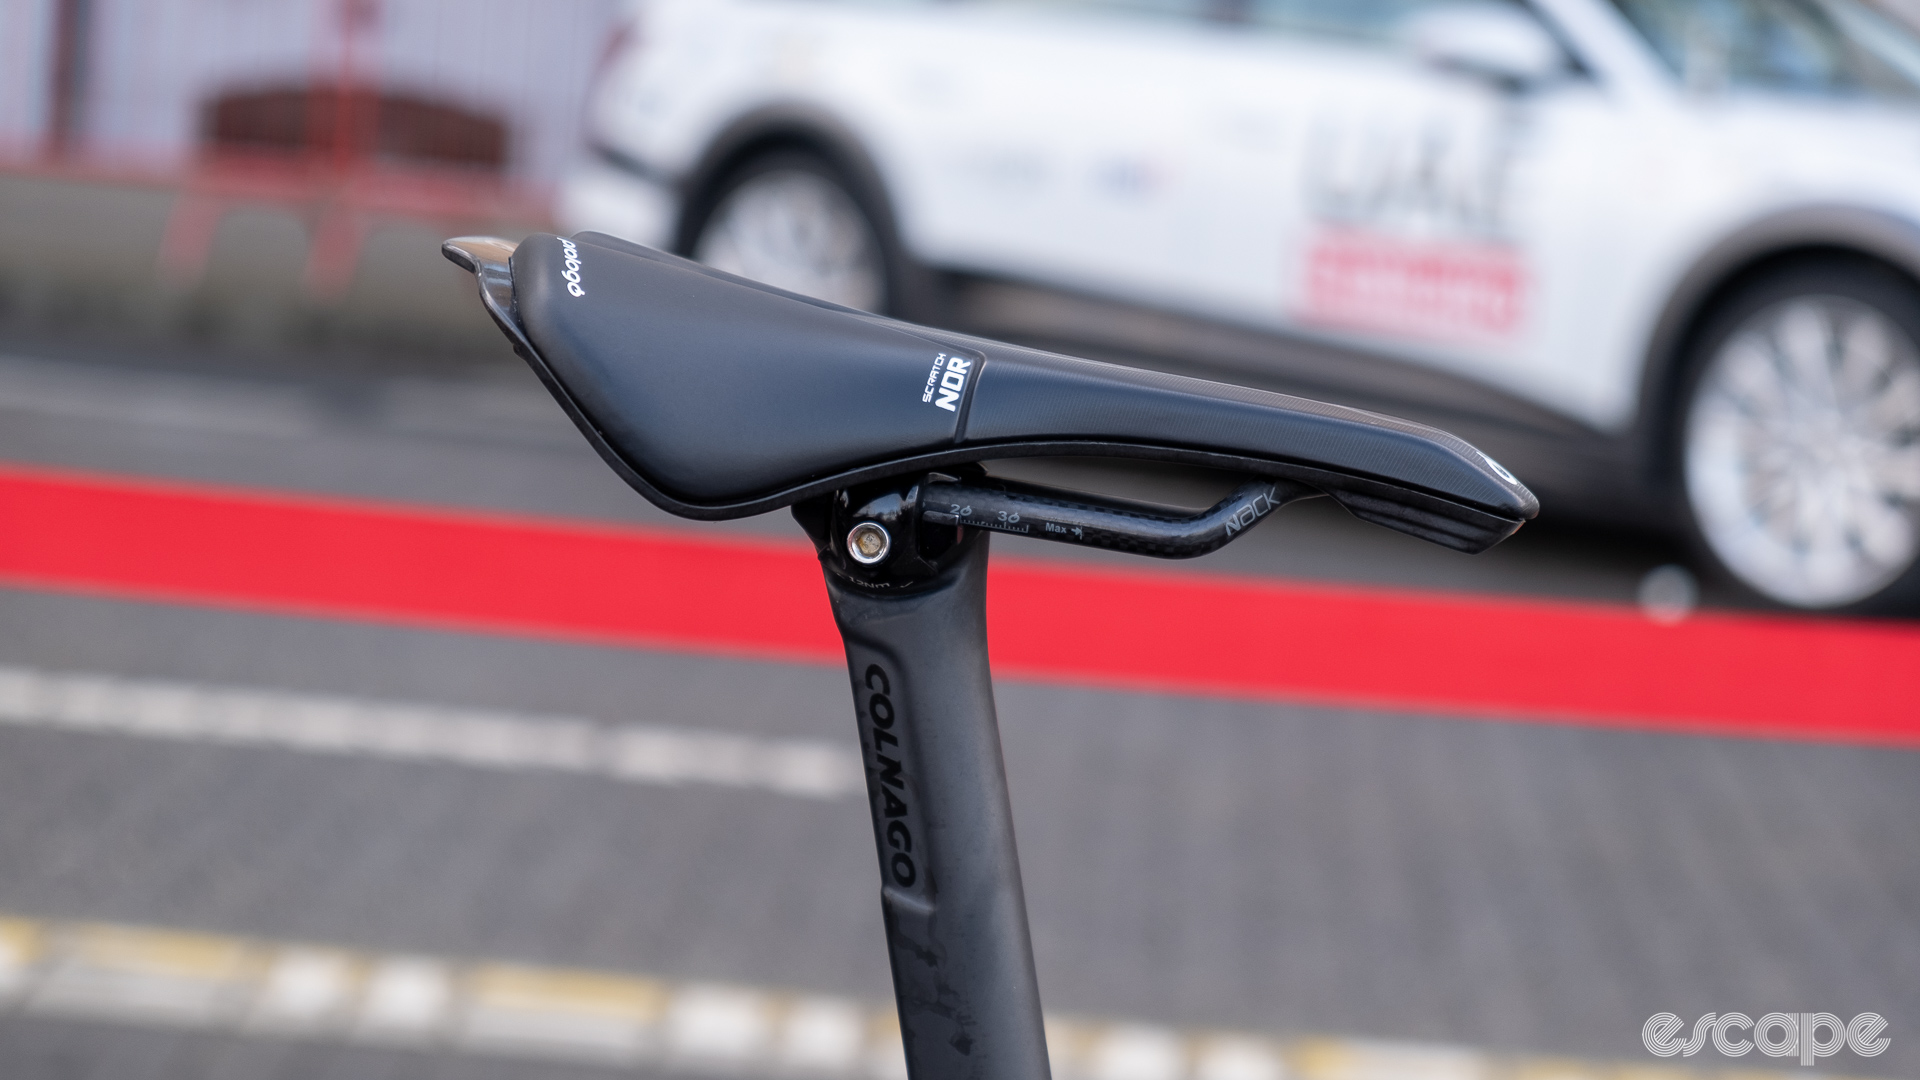 The image shows Tim Wellens Prologo saddle side on mounted to an inline seat post. 